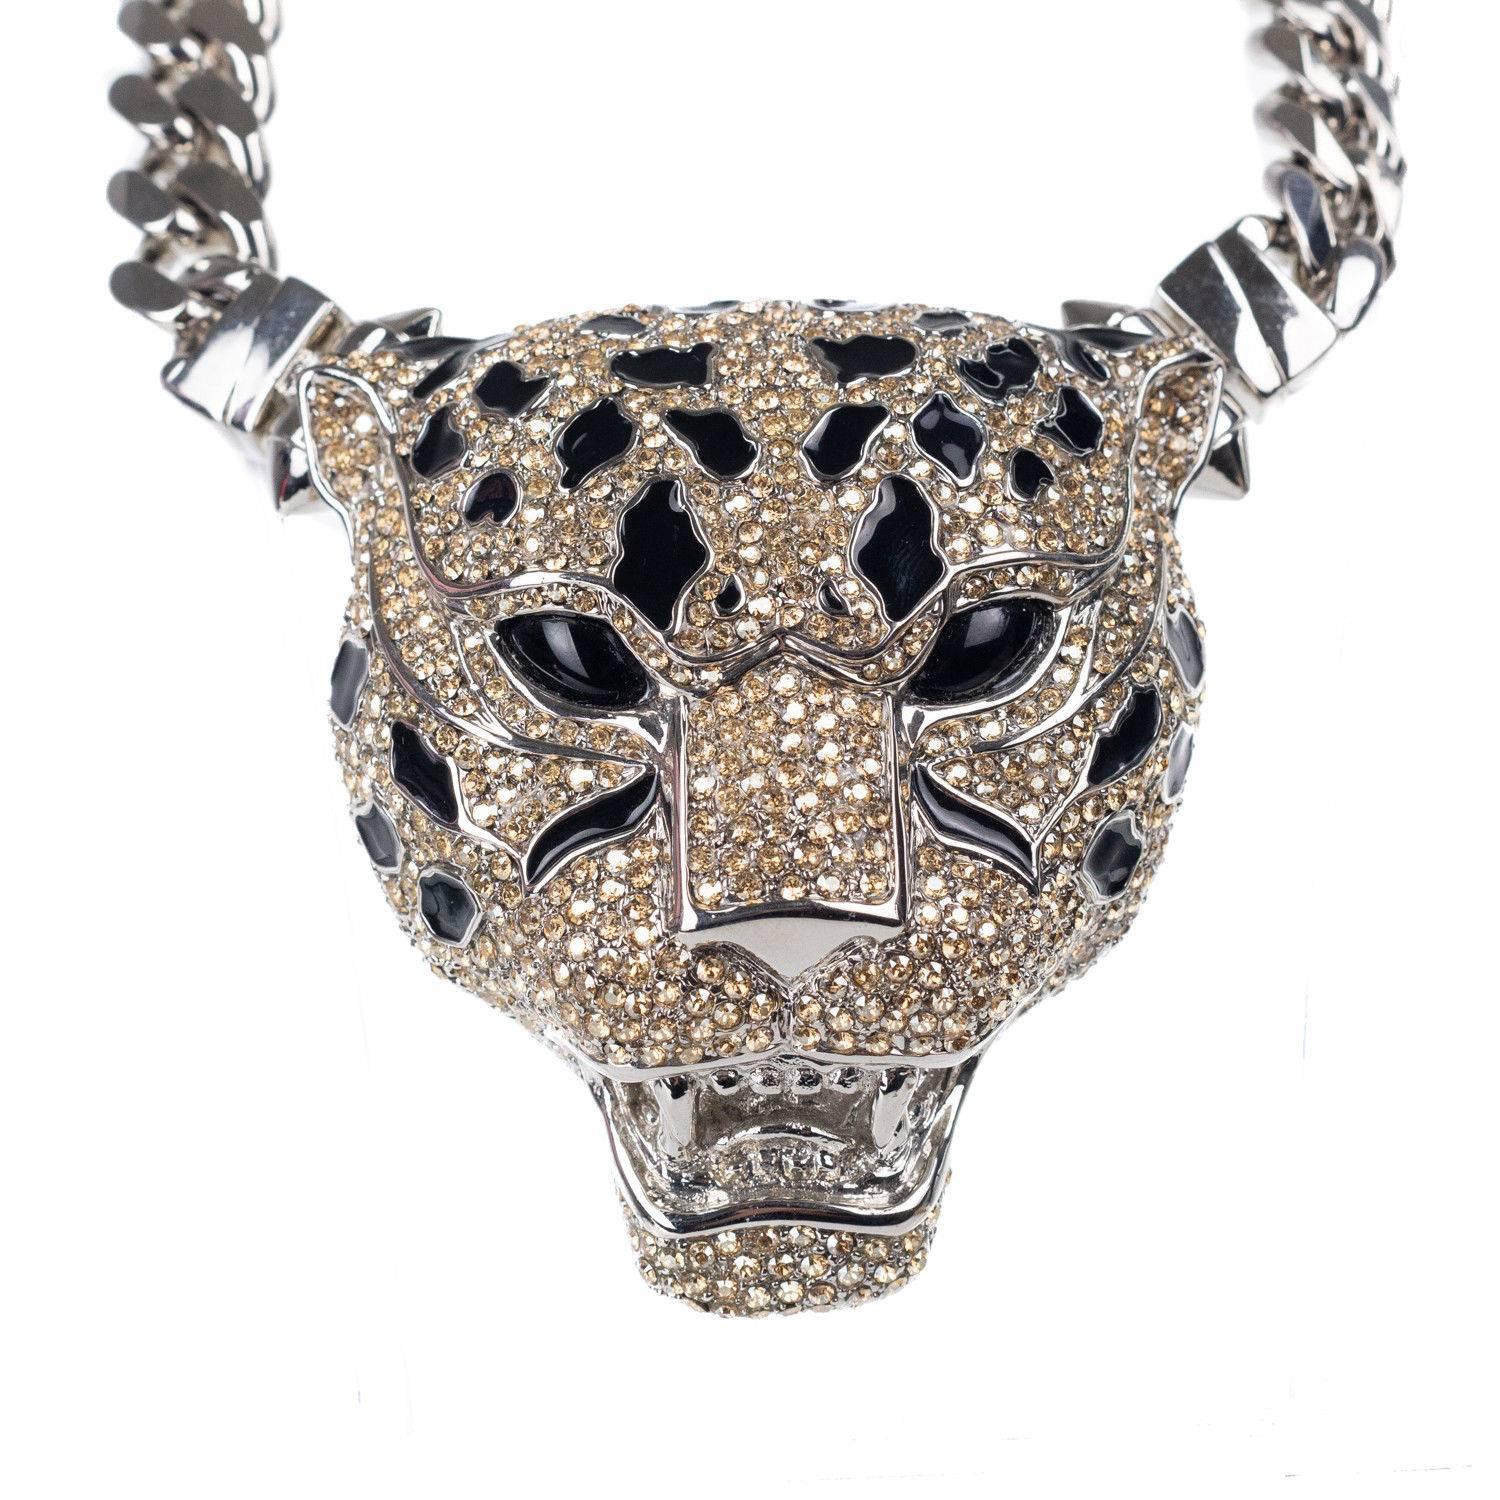 Men's Roberto Cavalli Silver Plated Swarovski Crystal Panther Necklace For Sale